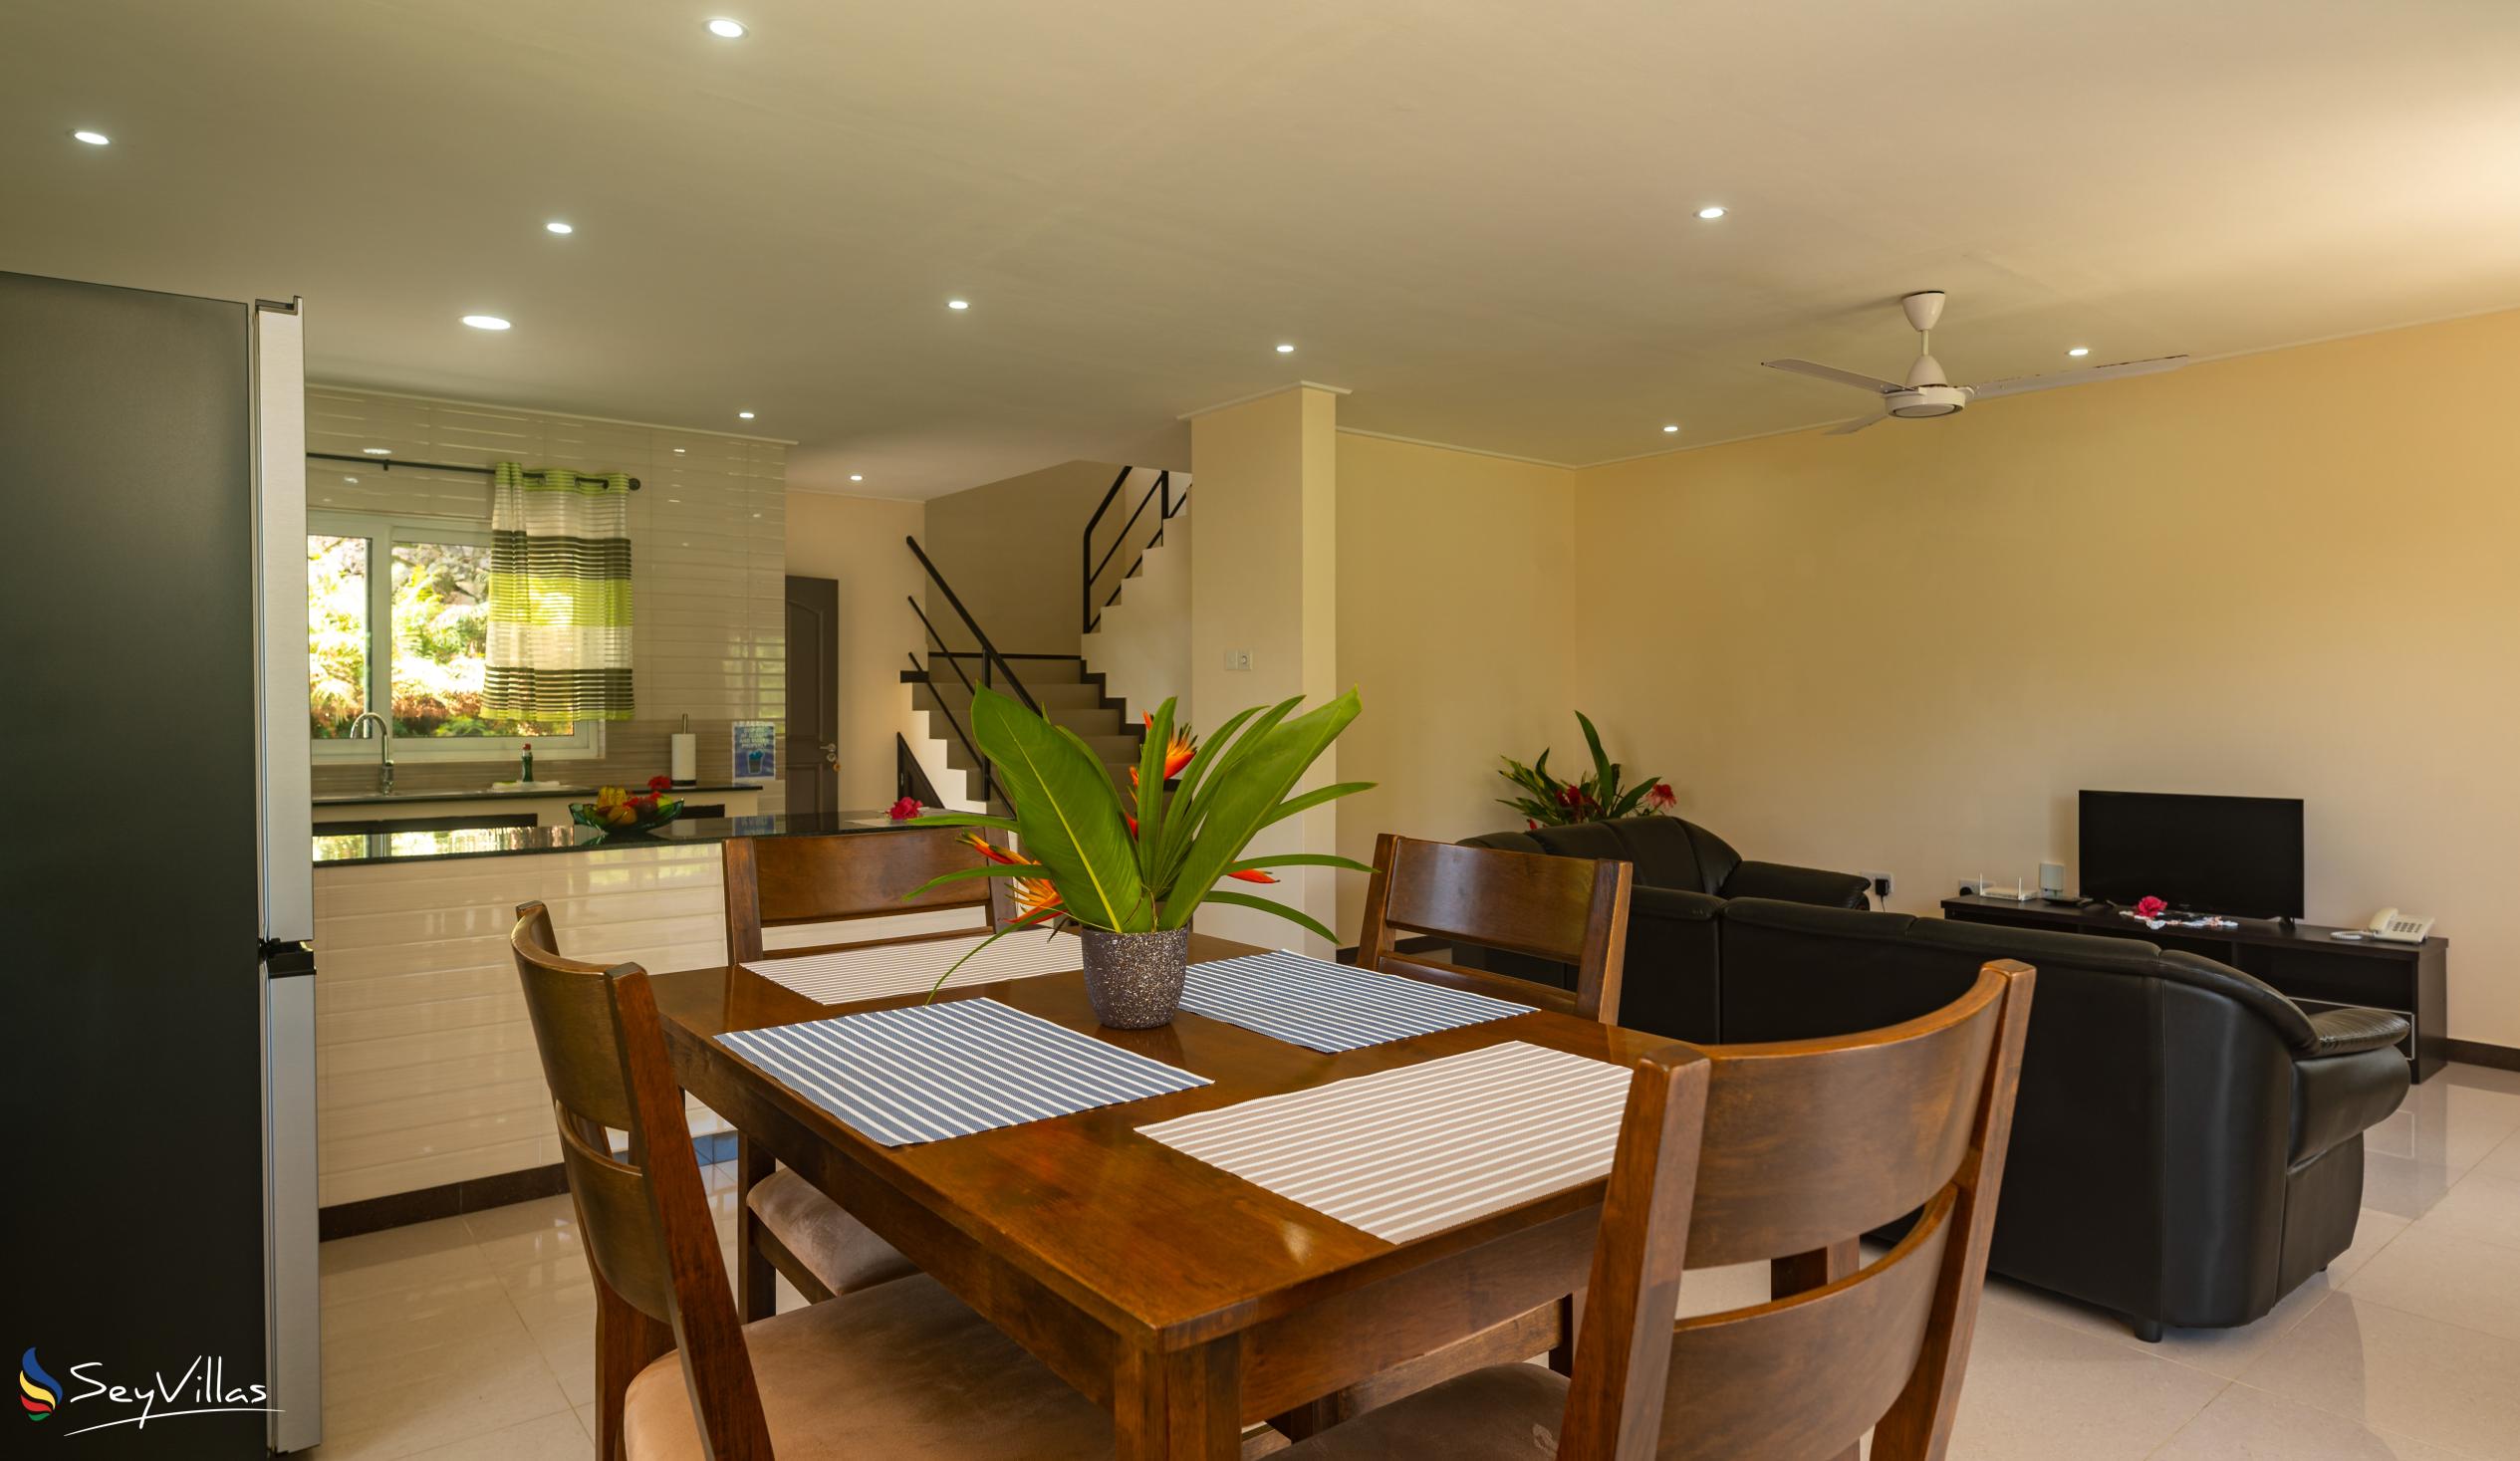 Foto 42: JAIDSS Holiday Apartments - Appartement 2 chambres - Mahé (Seychelles)